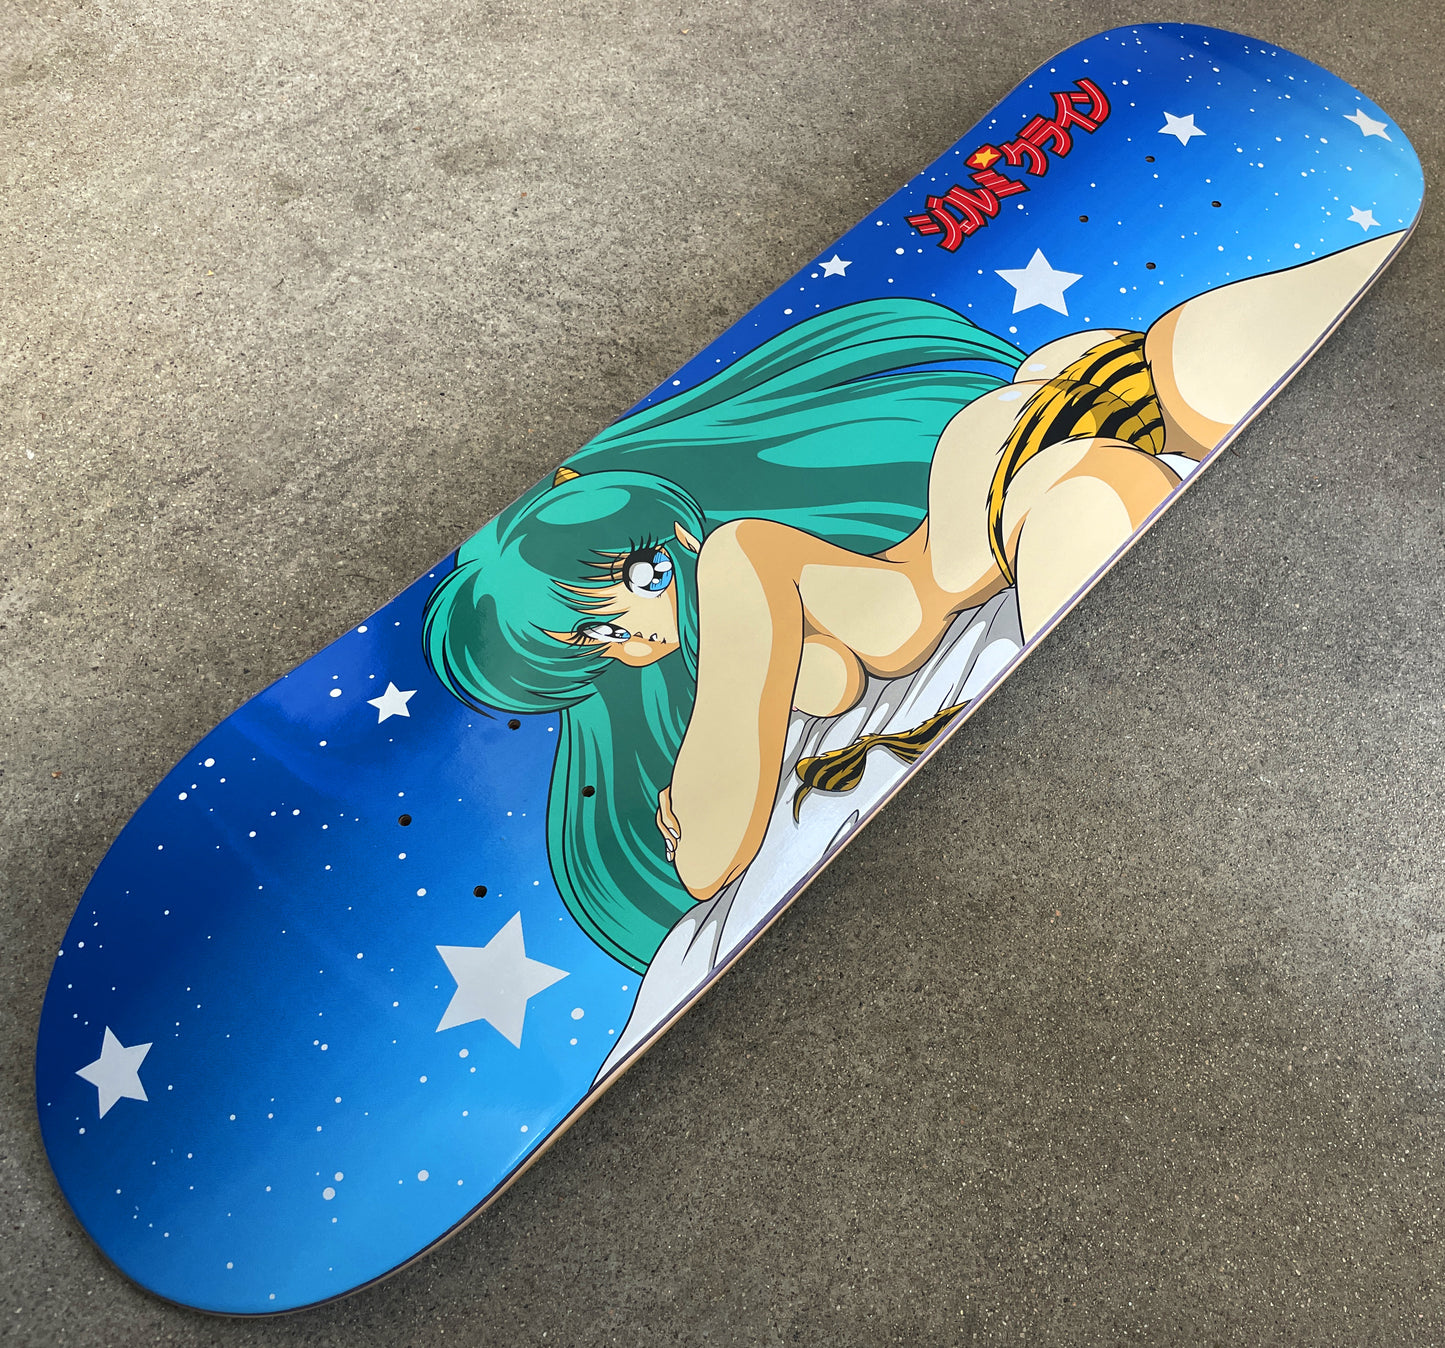 lum chan in bed 8.25 X 32.25